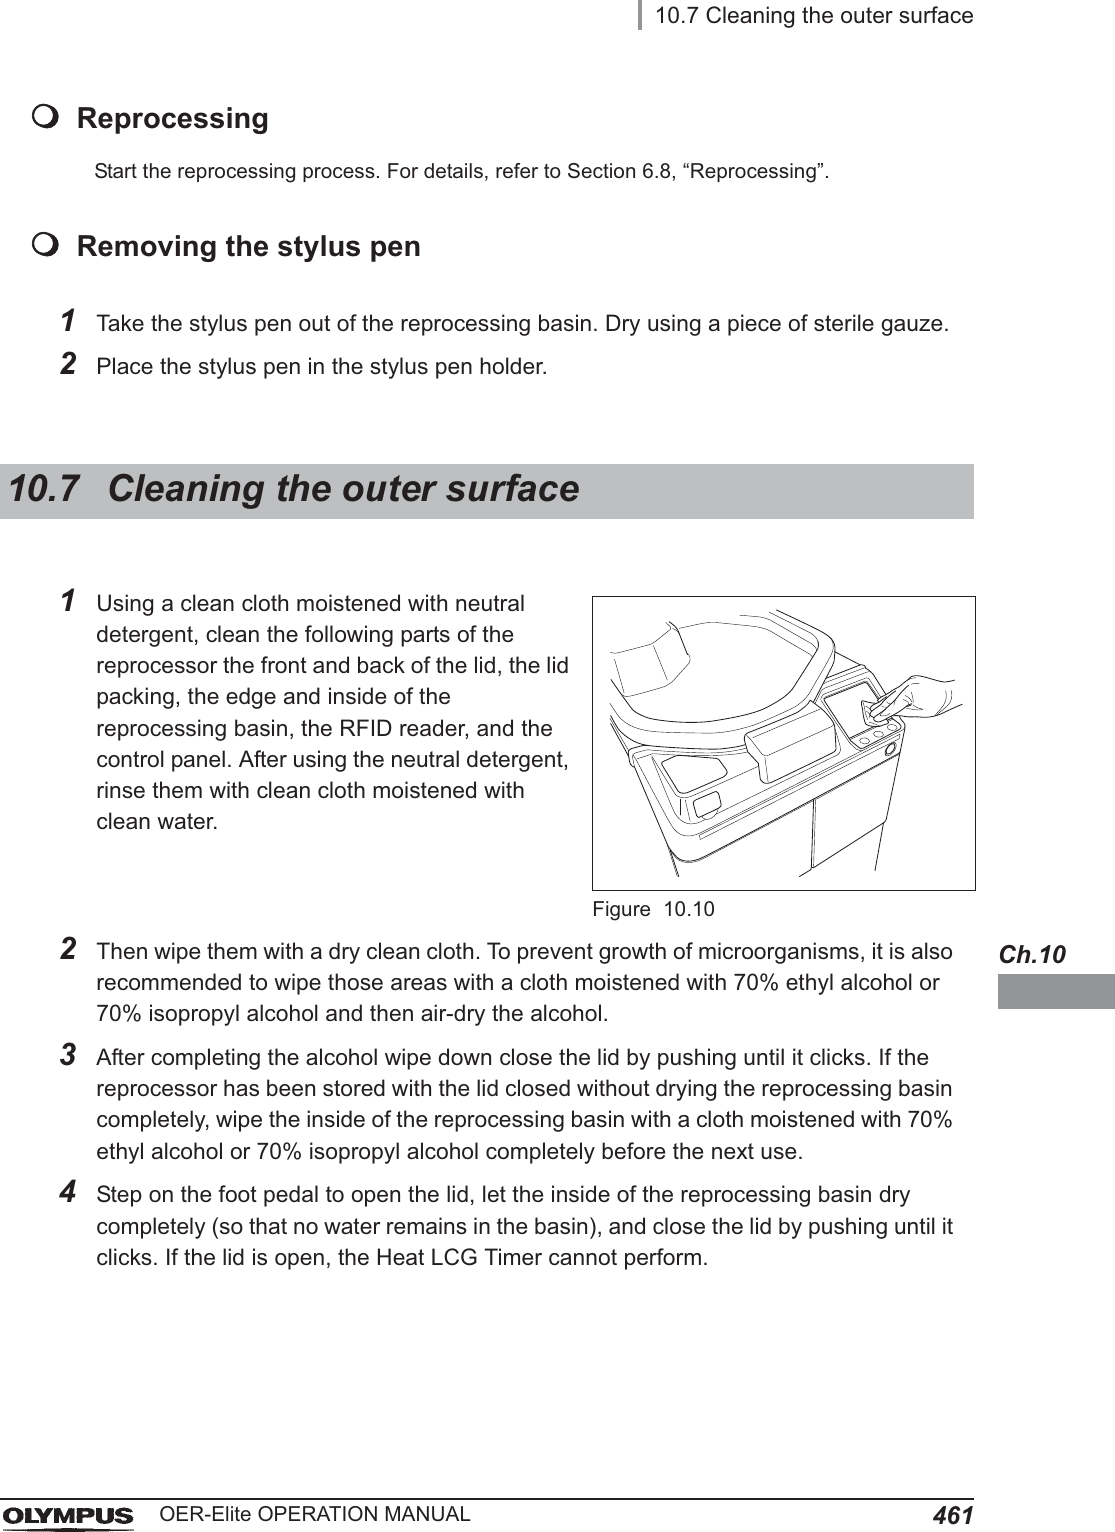 10.7 Cleaning the outer surface461OER-Elite OPERATION MANUALCh.10ReprocessingStart the reprocessing process. For details, refer to Section 6.8, “Reprocessing”.Removing the stylus pen1Take the stylus pen out of the reprocessing basin. Dry using a piece of sterile gauze.2Place the stylus pen in the stylus pen holder.10.7 Cleaning the outer surface1Using a clean cloth moistened with neutral detergent, clean the following parts of the reprocessor the front and back of the lid, the lid packing, the edge and inside of the reprocessing basin, the RFID reader, and the control panel. After using the neutral detergent, rinse them with clean cloth moistened with clean water.Figure 10.102Then wipe them with a dry clean cloth. To prevent growth of microorganisms, it is also recommended to wipe those areas with a cloth moistened with 70% ethyl alcohol or 70% isopropyl alcohol and then air-dry the alcohol.3After completing the alcohol wipe down close the lid by pushing until it clicks. If the reprocessor has been stored with the lid closed without drying the reprocessing basin completely, wipe the inside of the reprocessing basin with a cloth moistened with 70% ethyl alcohol or 70% isopropyl alcohol completely before the next use.4Step on the foot pedal to open the lid, let the inside of the reprocessing basin dry completely (so that no water remains in the basin), and close the lid by pushing until it clicks. If the lid is open, the Heat LCG Timer cannot perform.